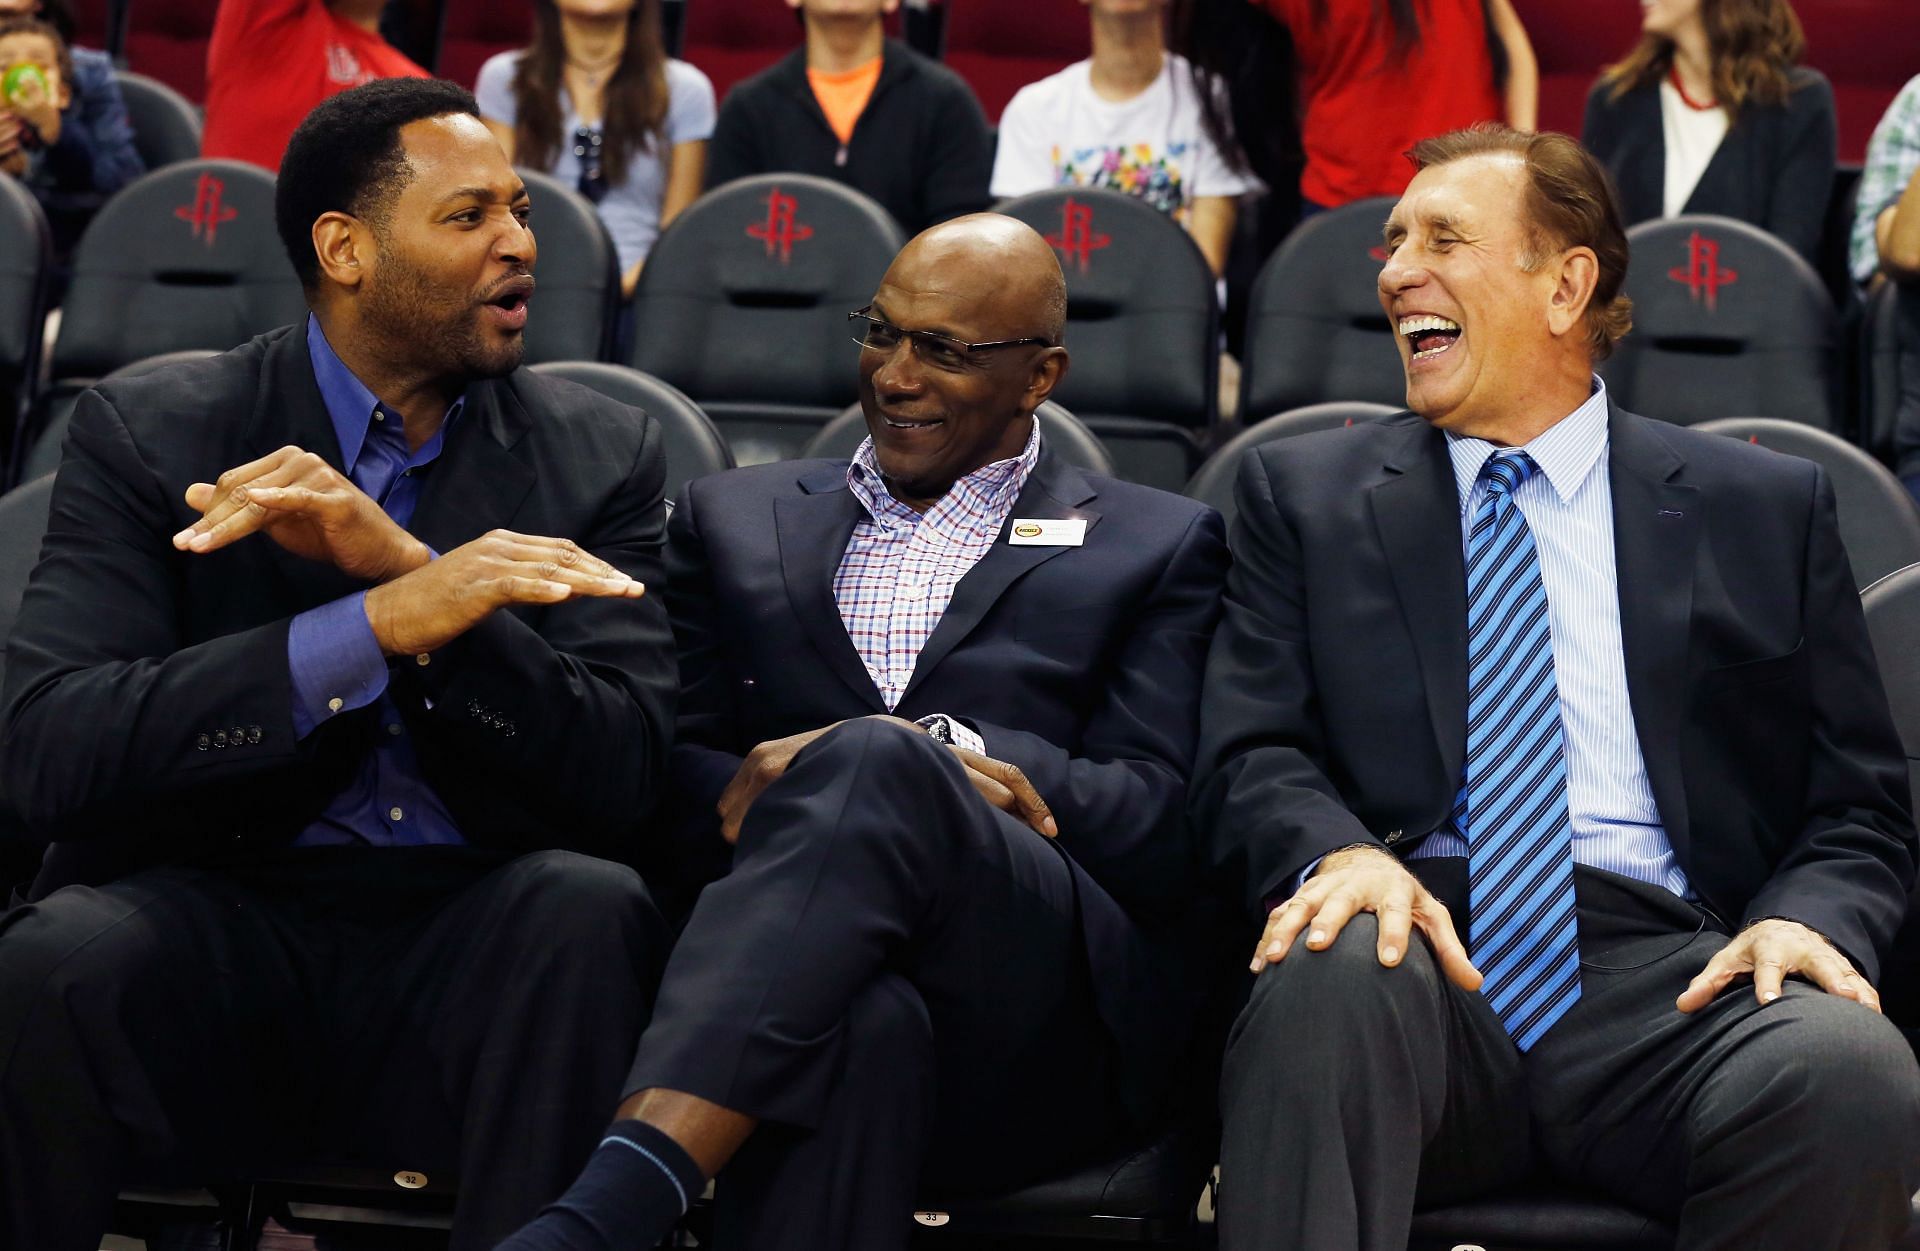 Fomer Houston Rockets Robert Horry and Clyde Drexler share a laugh with former coach Rudy Tomjanovich as the team honors the 20th anniversary of back-to-back championships during their their game against the Denver Nuggets at the Toyota Center on March 19, 2015 in Houston, Texas.